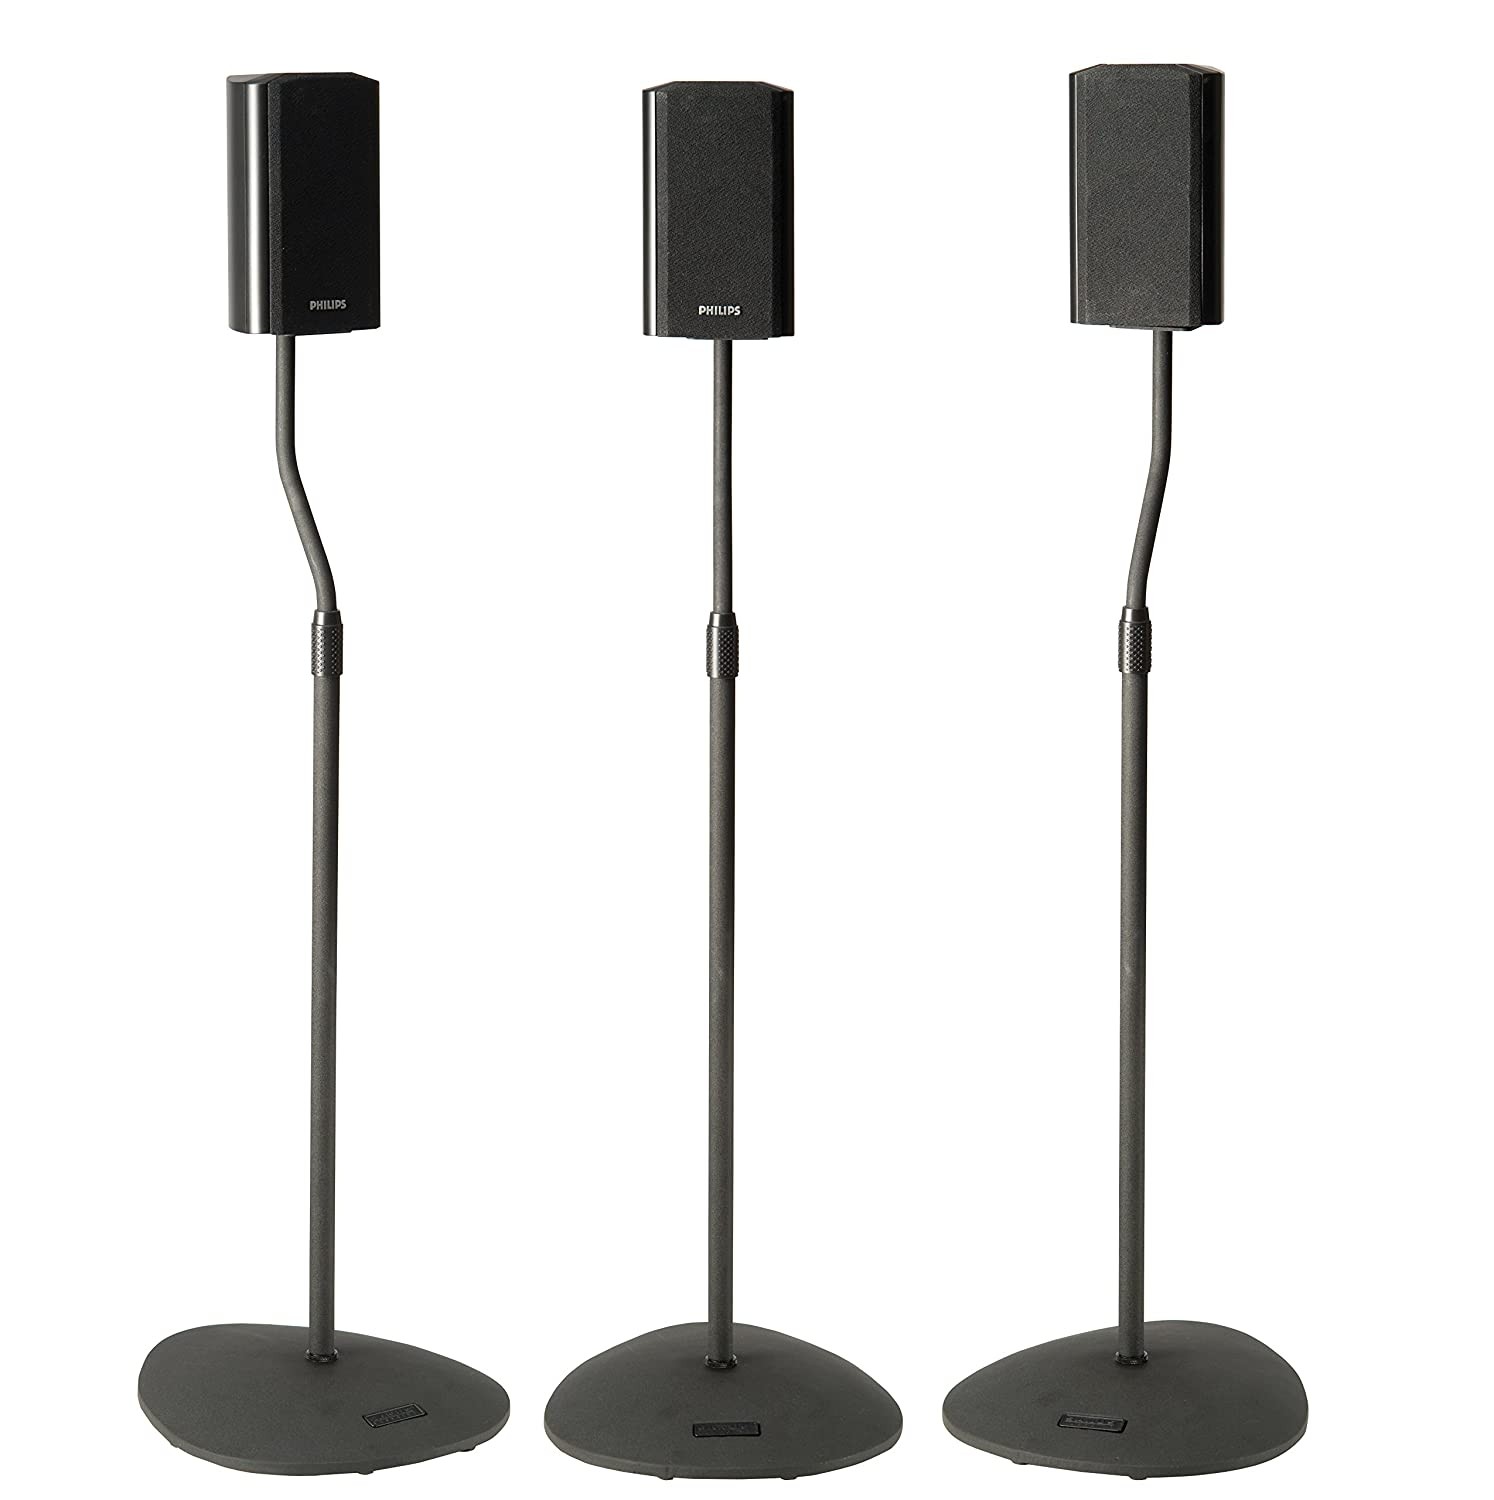 Adjustable Height Speaker Stand - Extends 28" to 38" - Holds Satellite Speakers-Set of 2